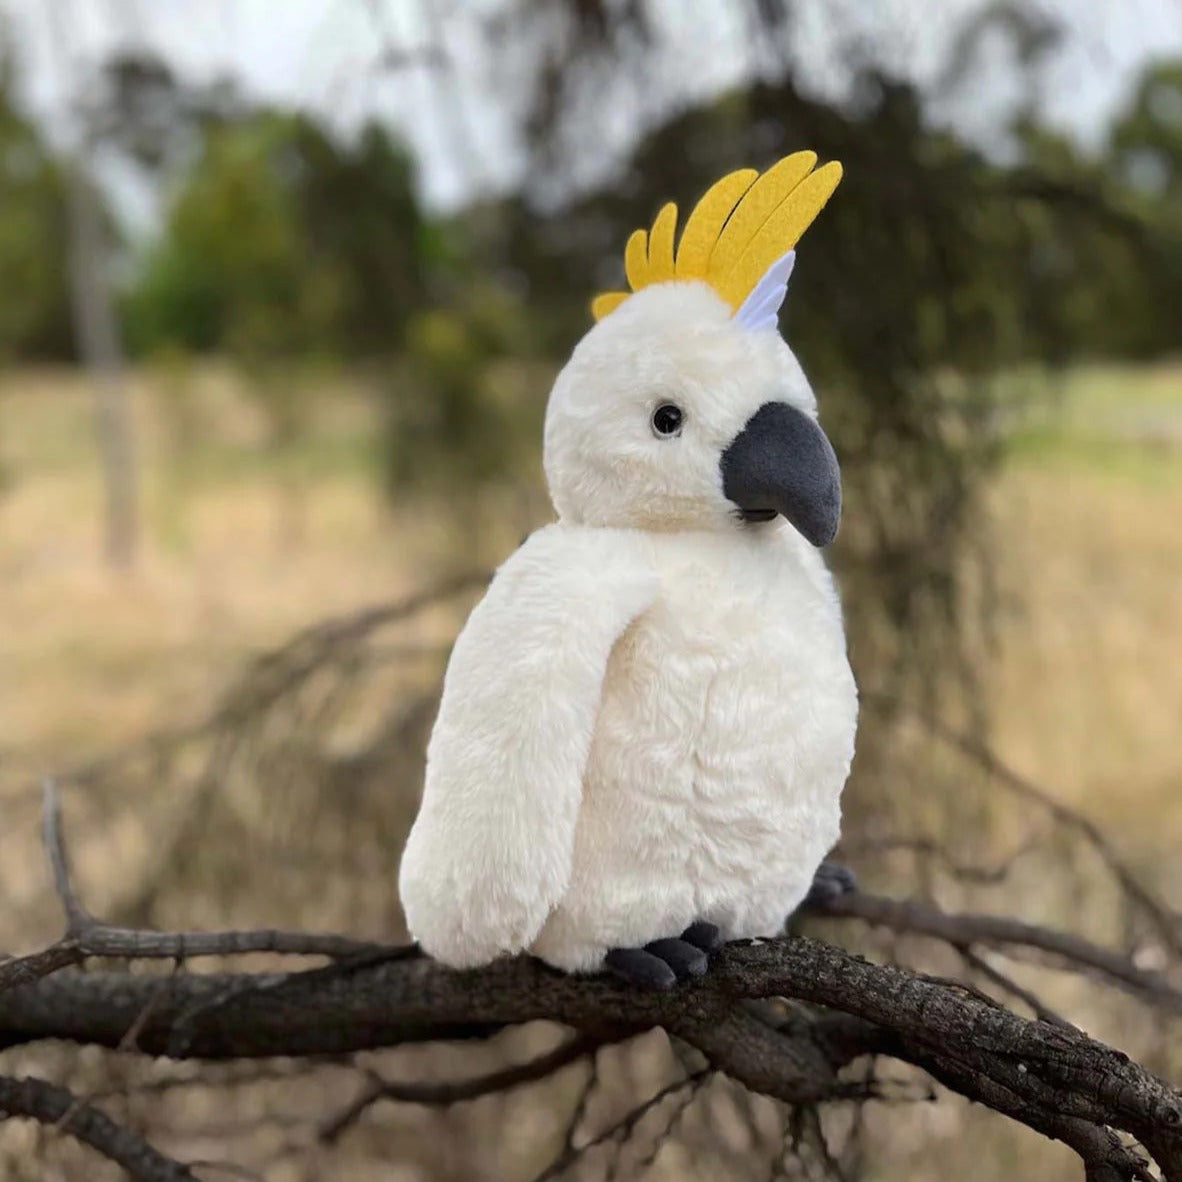 soft toy cockatoo - angus and dudley